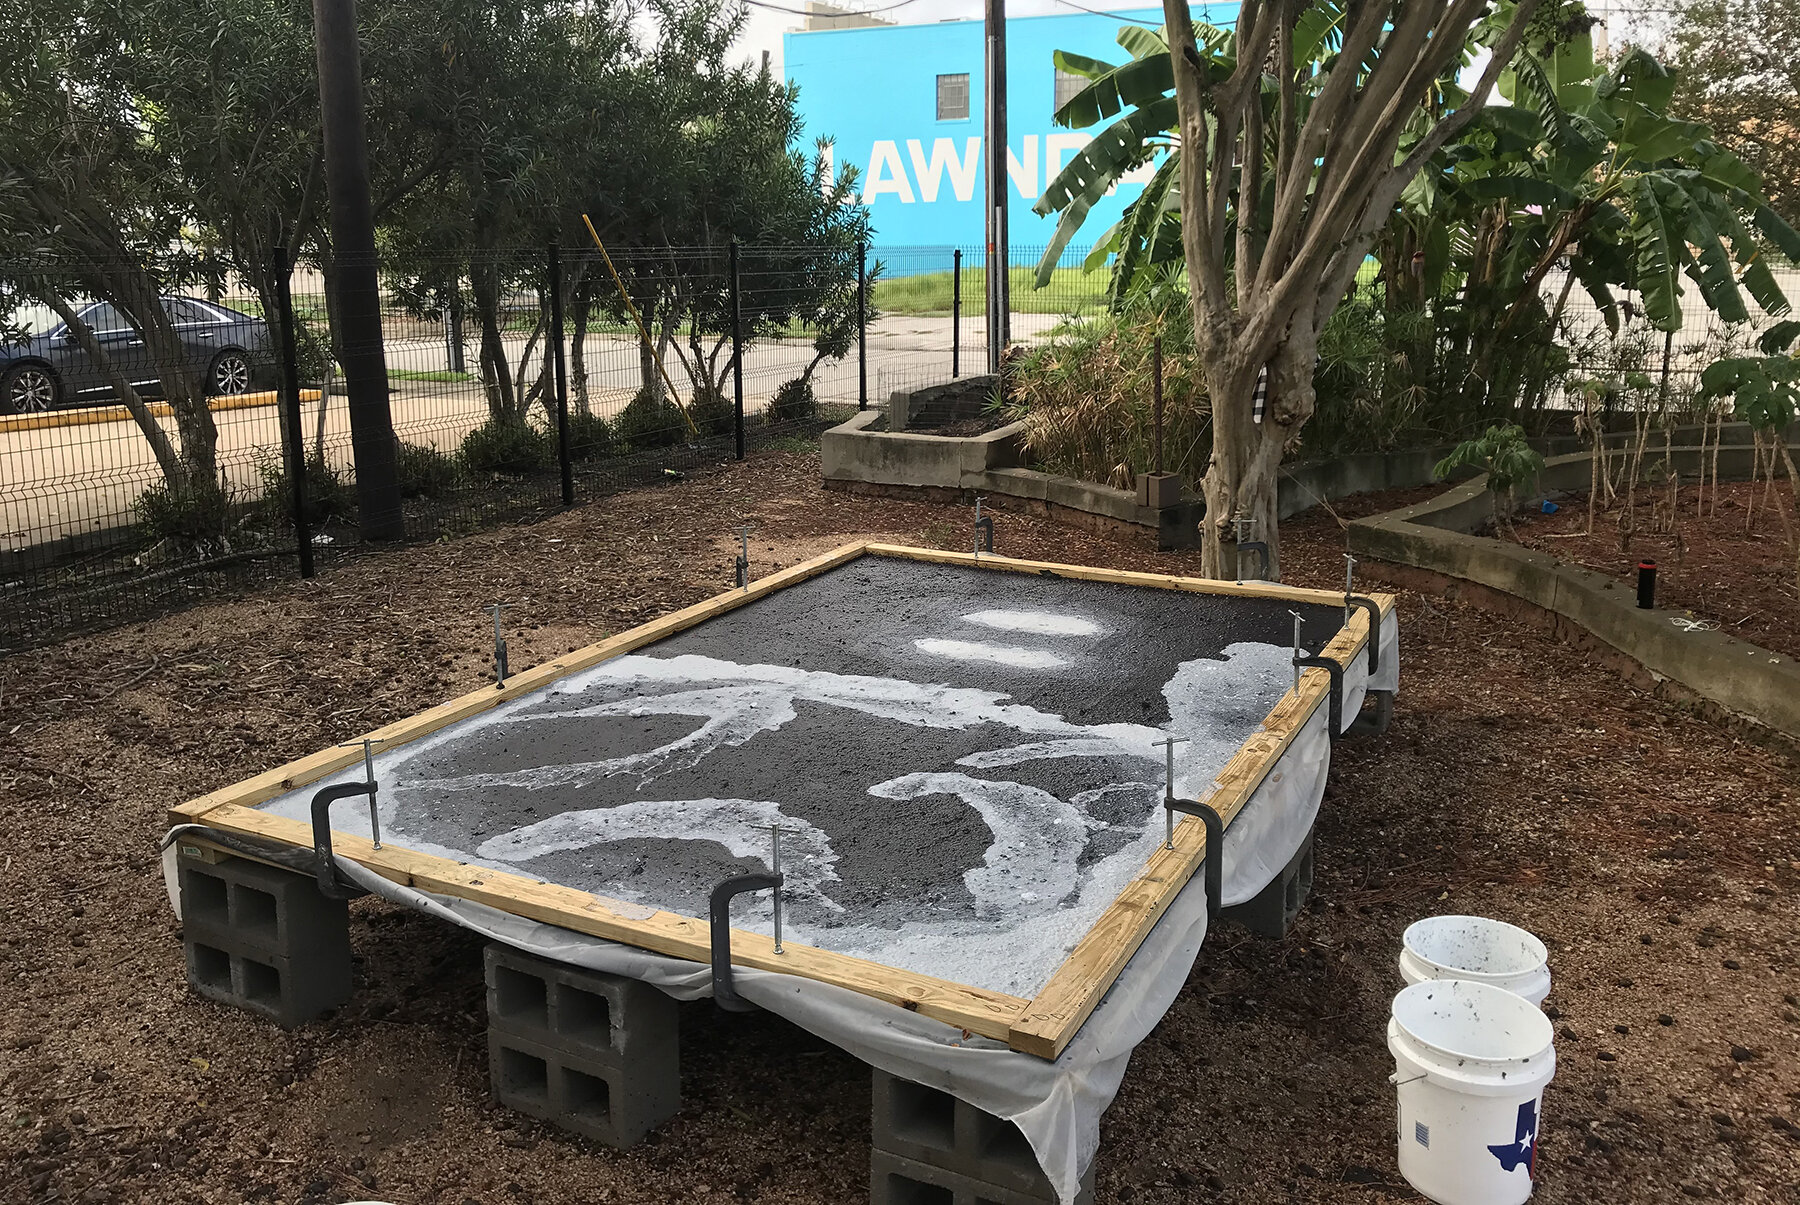  Hong Hong, in-process environmental pour, location: Houston, TX, 2020, Artwork Courtesy of the Artist 